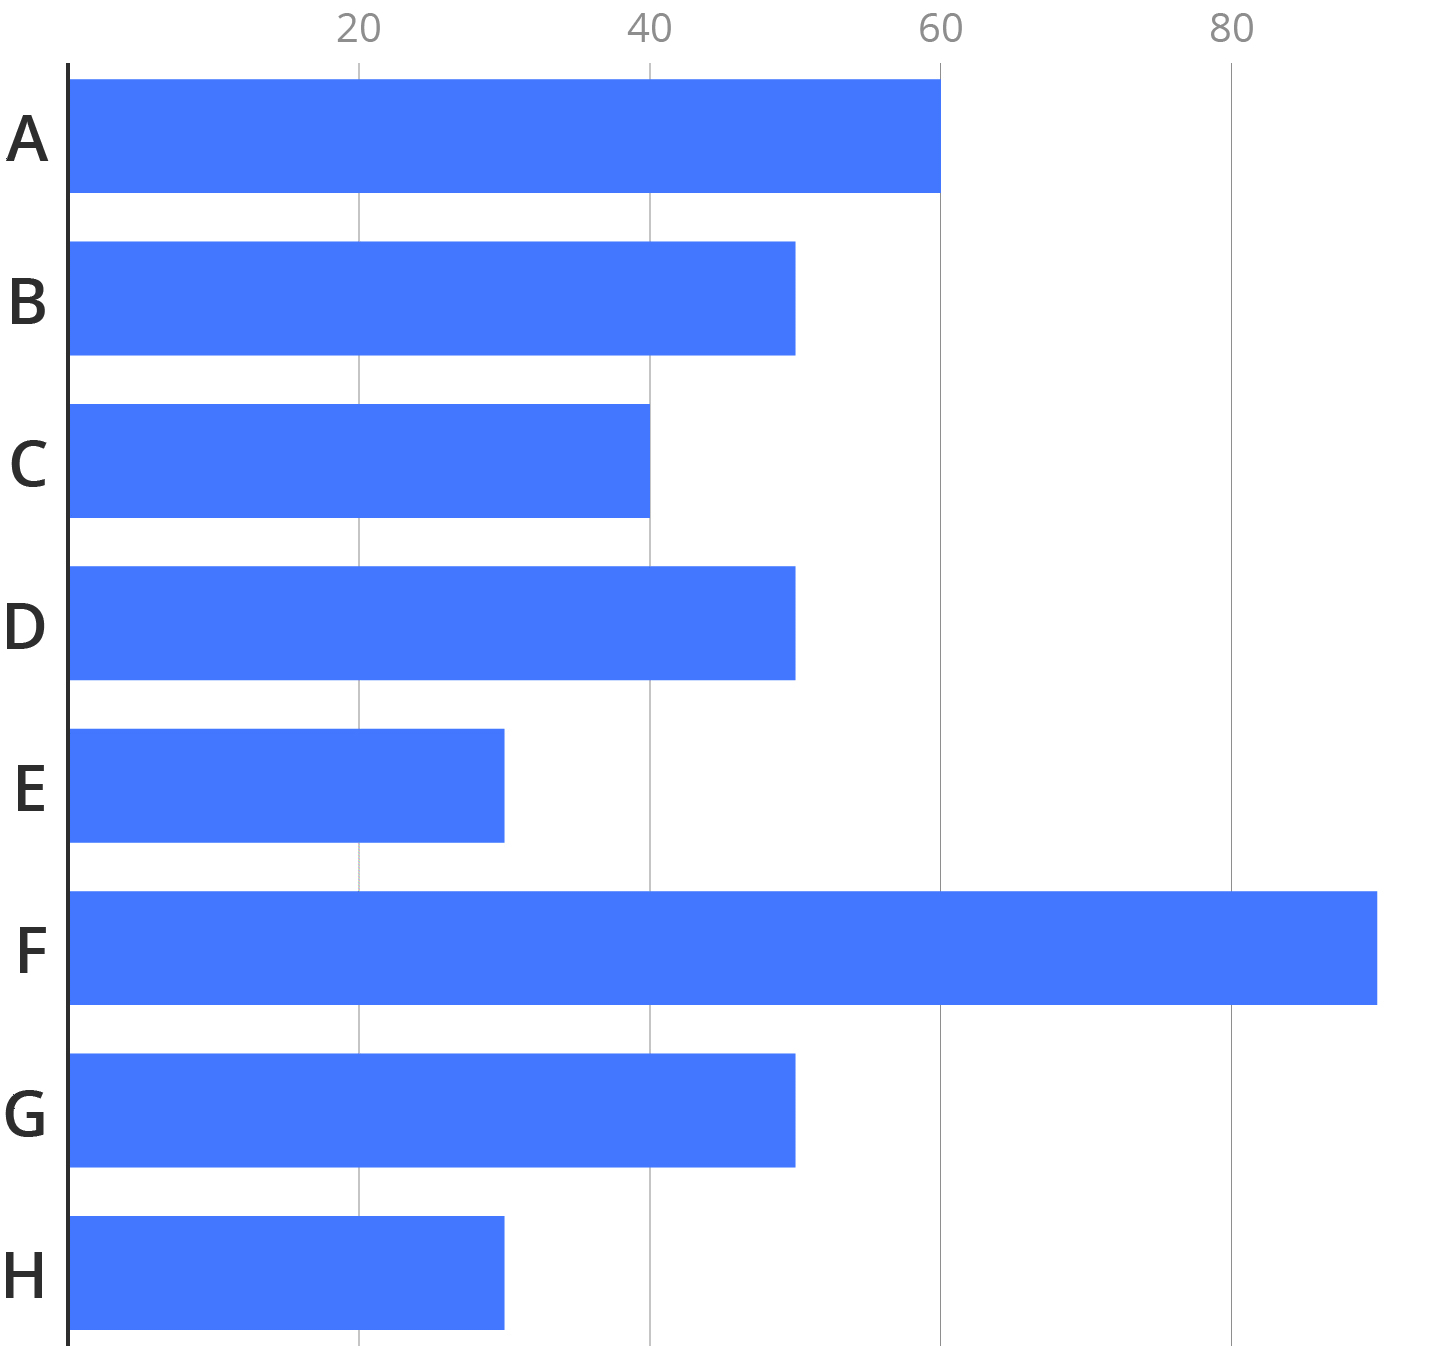 An horizontal bar chart with 8 bars and vertical gridlines for the values 20, 40, 60 and 80